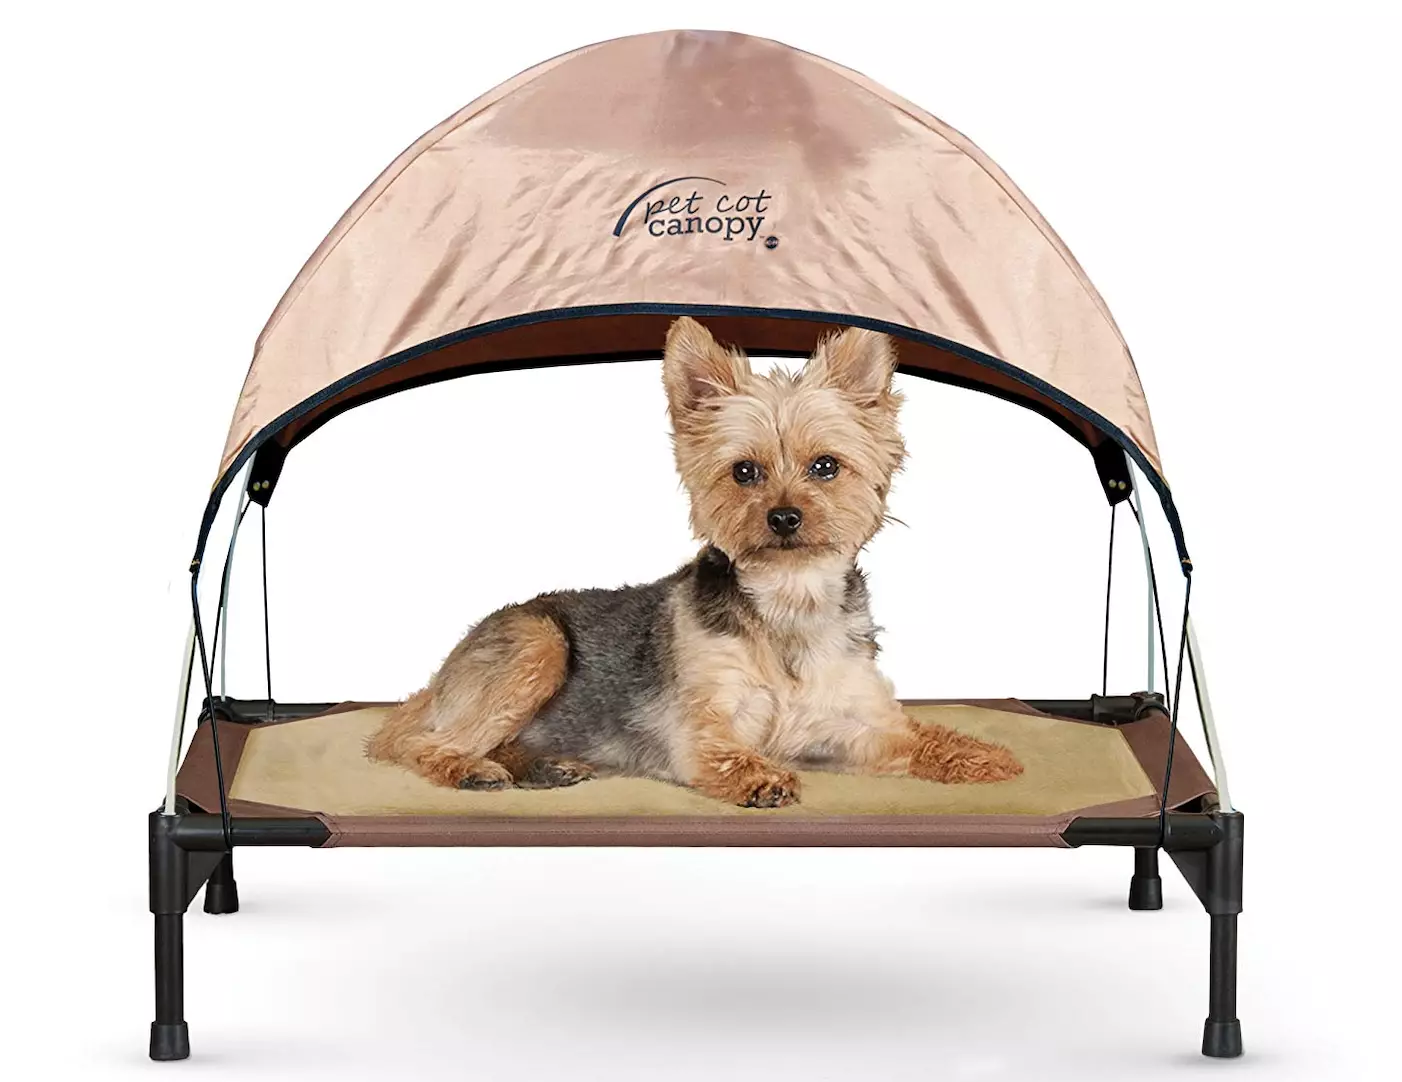 Amazon's offering a K&H Pets Cot Canopy that's especially suited to small dogs.